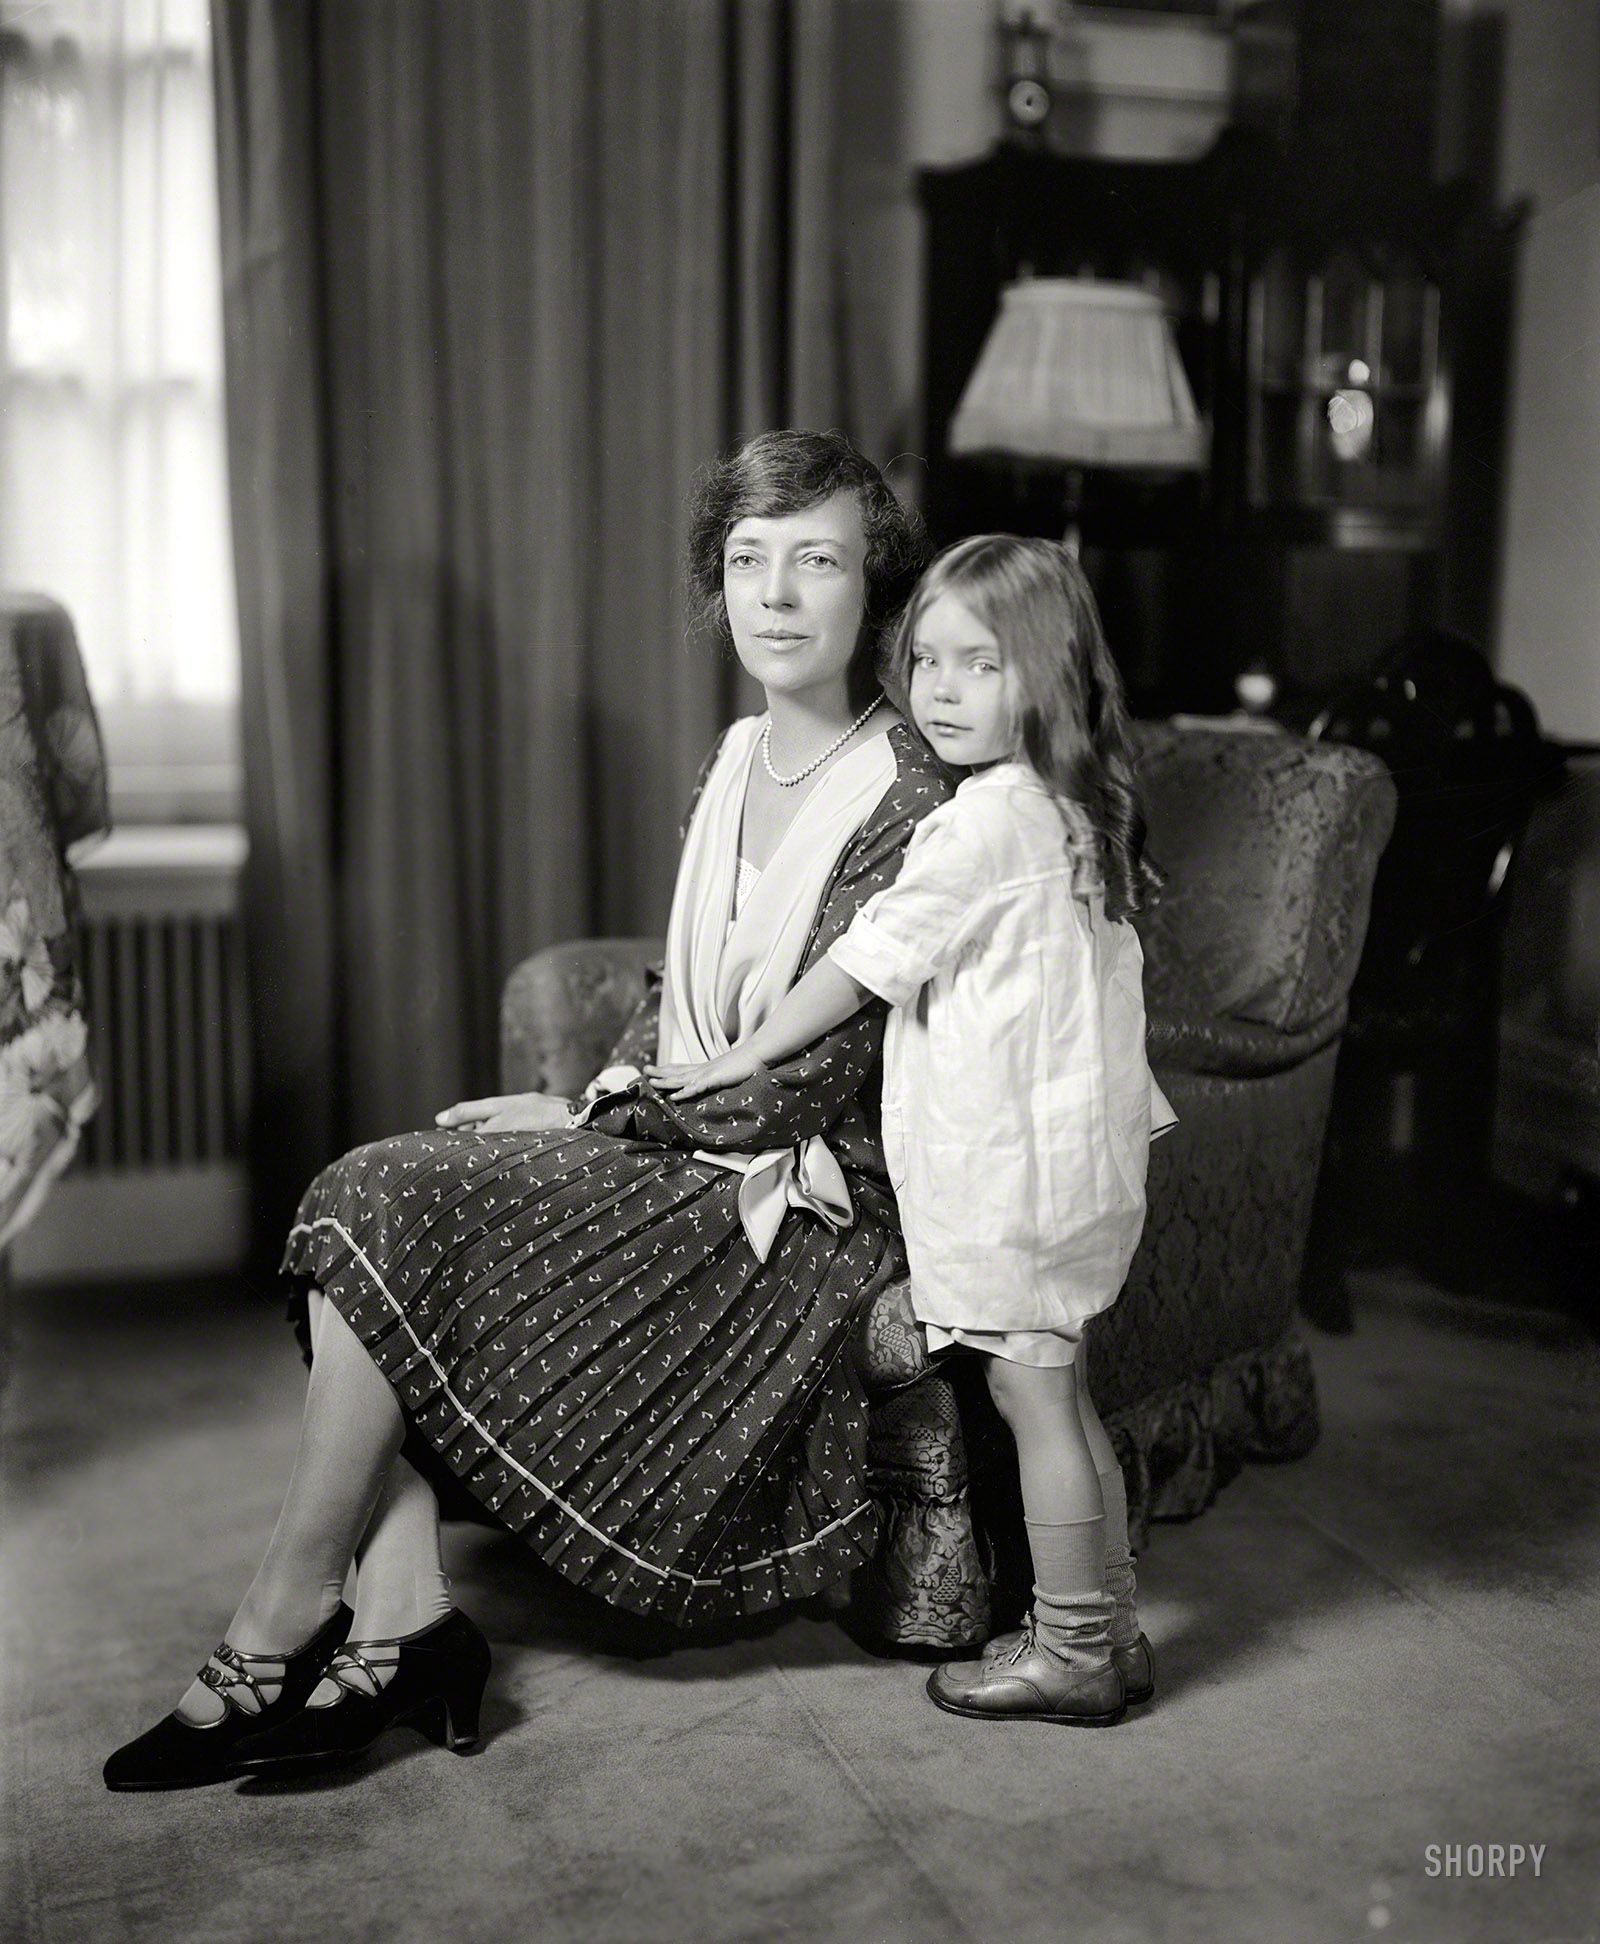 Washington, D.C., circa 1929. "Paulina Longworth with mother." Mumsy being the former Alice Roosevelt, oldest daughter of Teddy and wife of House Speaker Nicholas Longworth. Paulina's short life ended with an overdose in 1957, when she was 31. Harris & Ewing Collection glass negative. View full size.